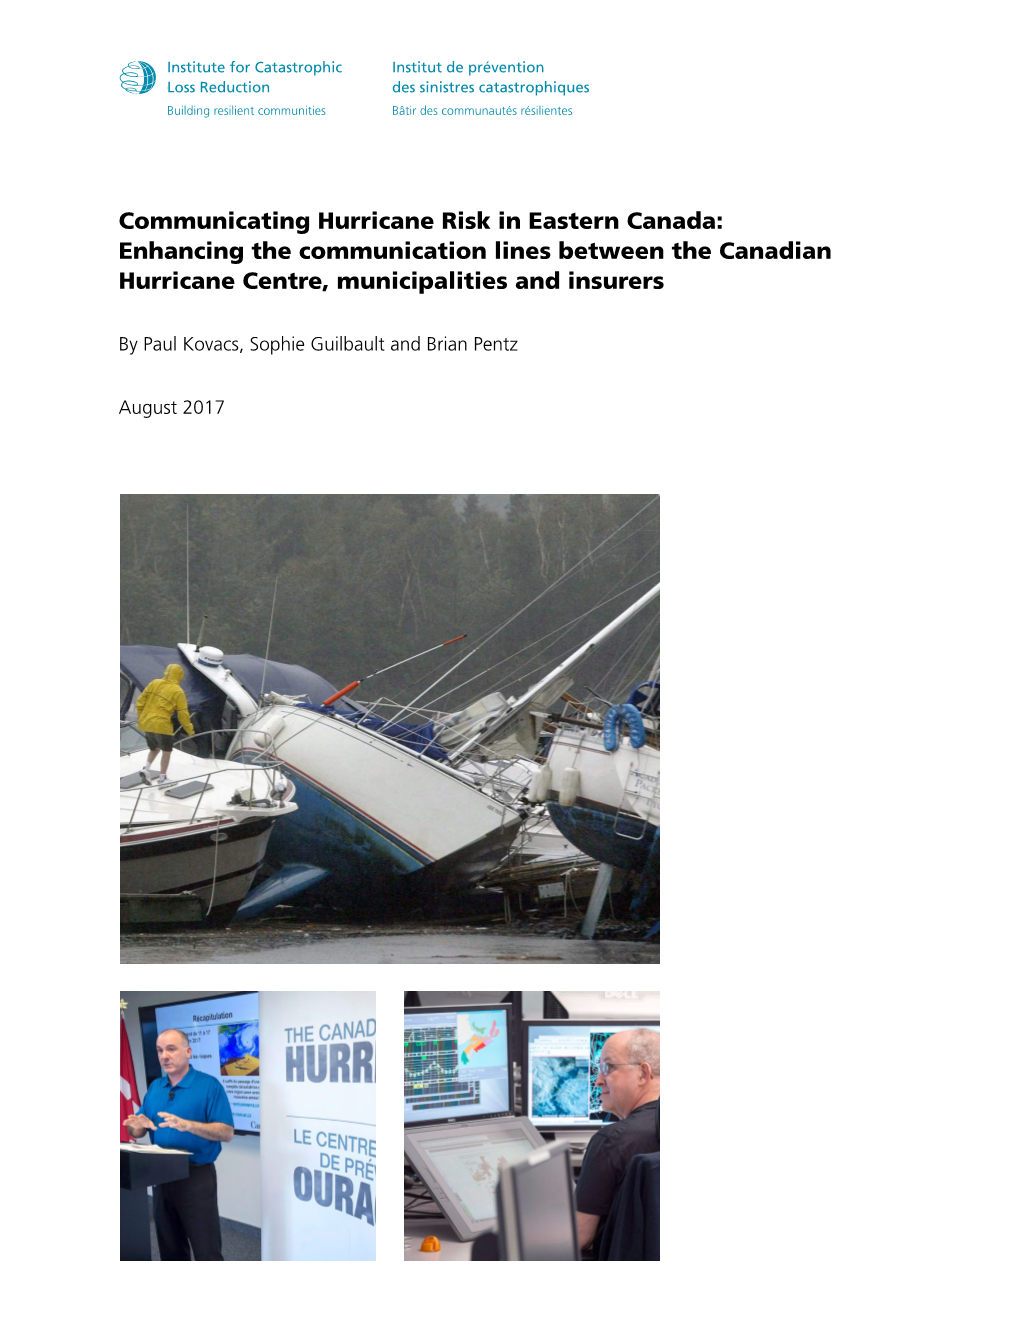 Communicating Hurricane Risk in Eastern Canada: Enhancing the Communication Lines Between the Canadian Hurricane Centre, Municipalities and Insurers